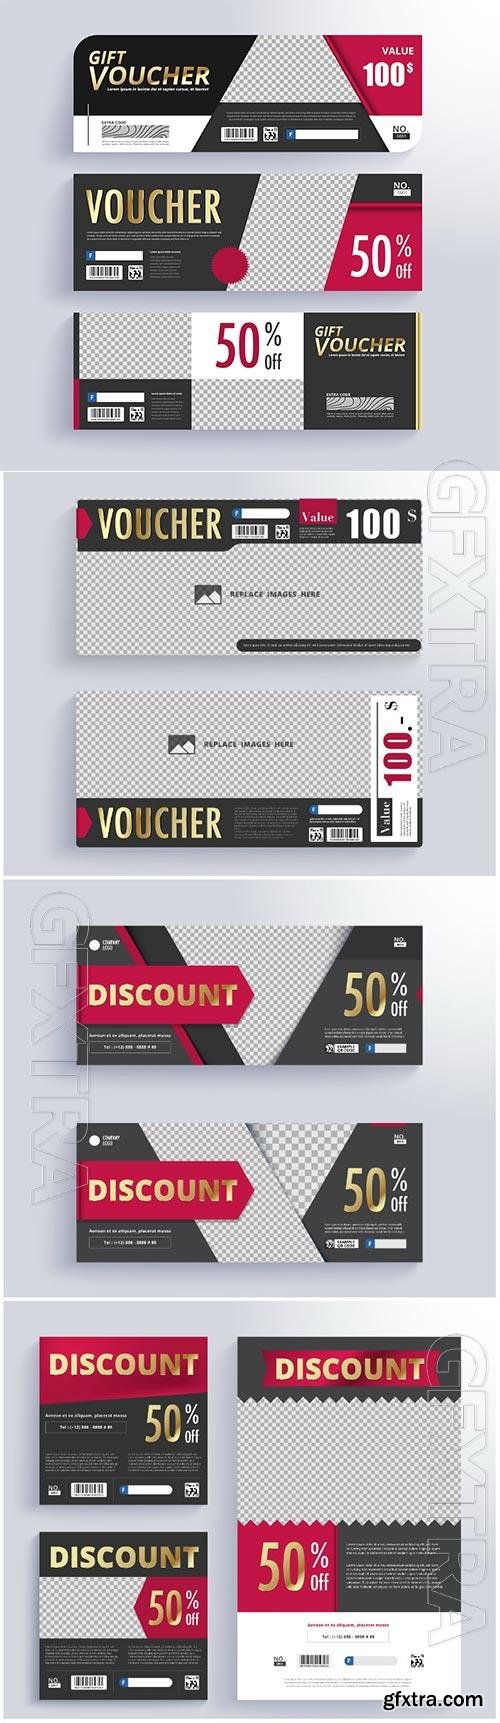 Vouchers and discount cards in vector